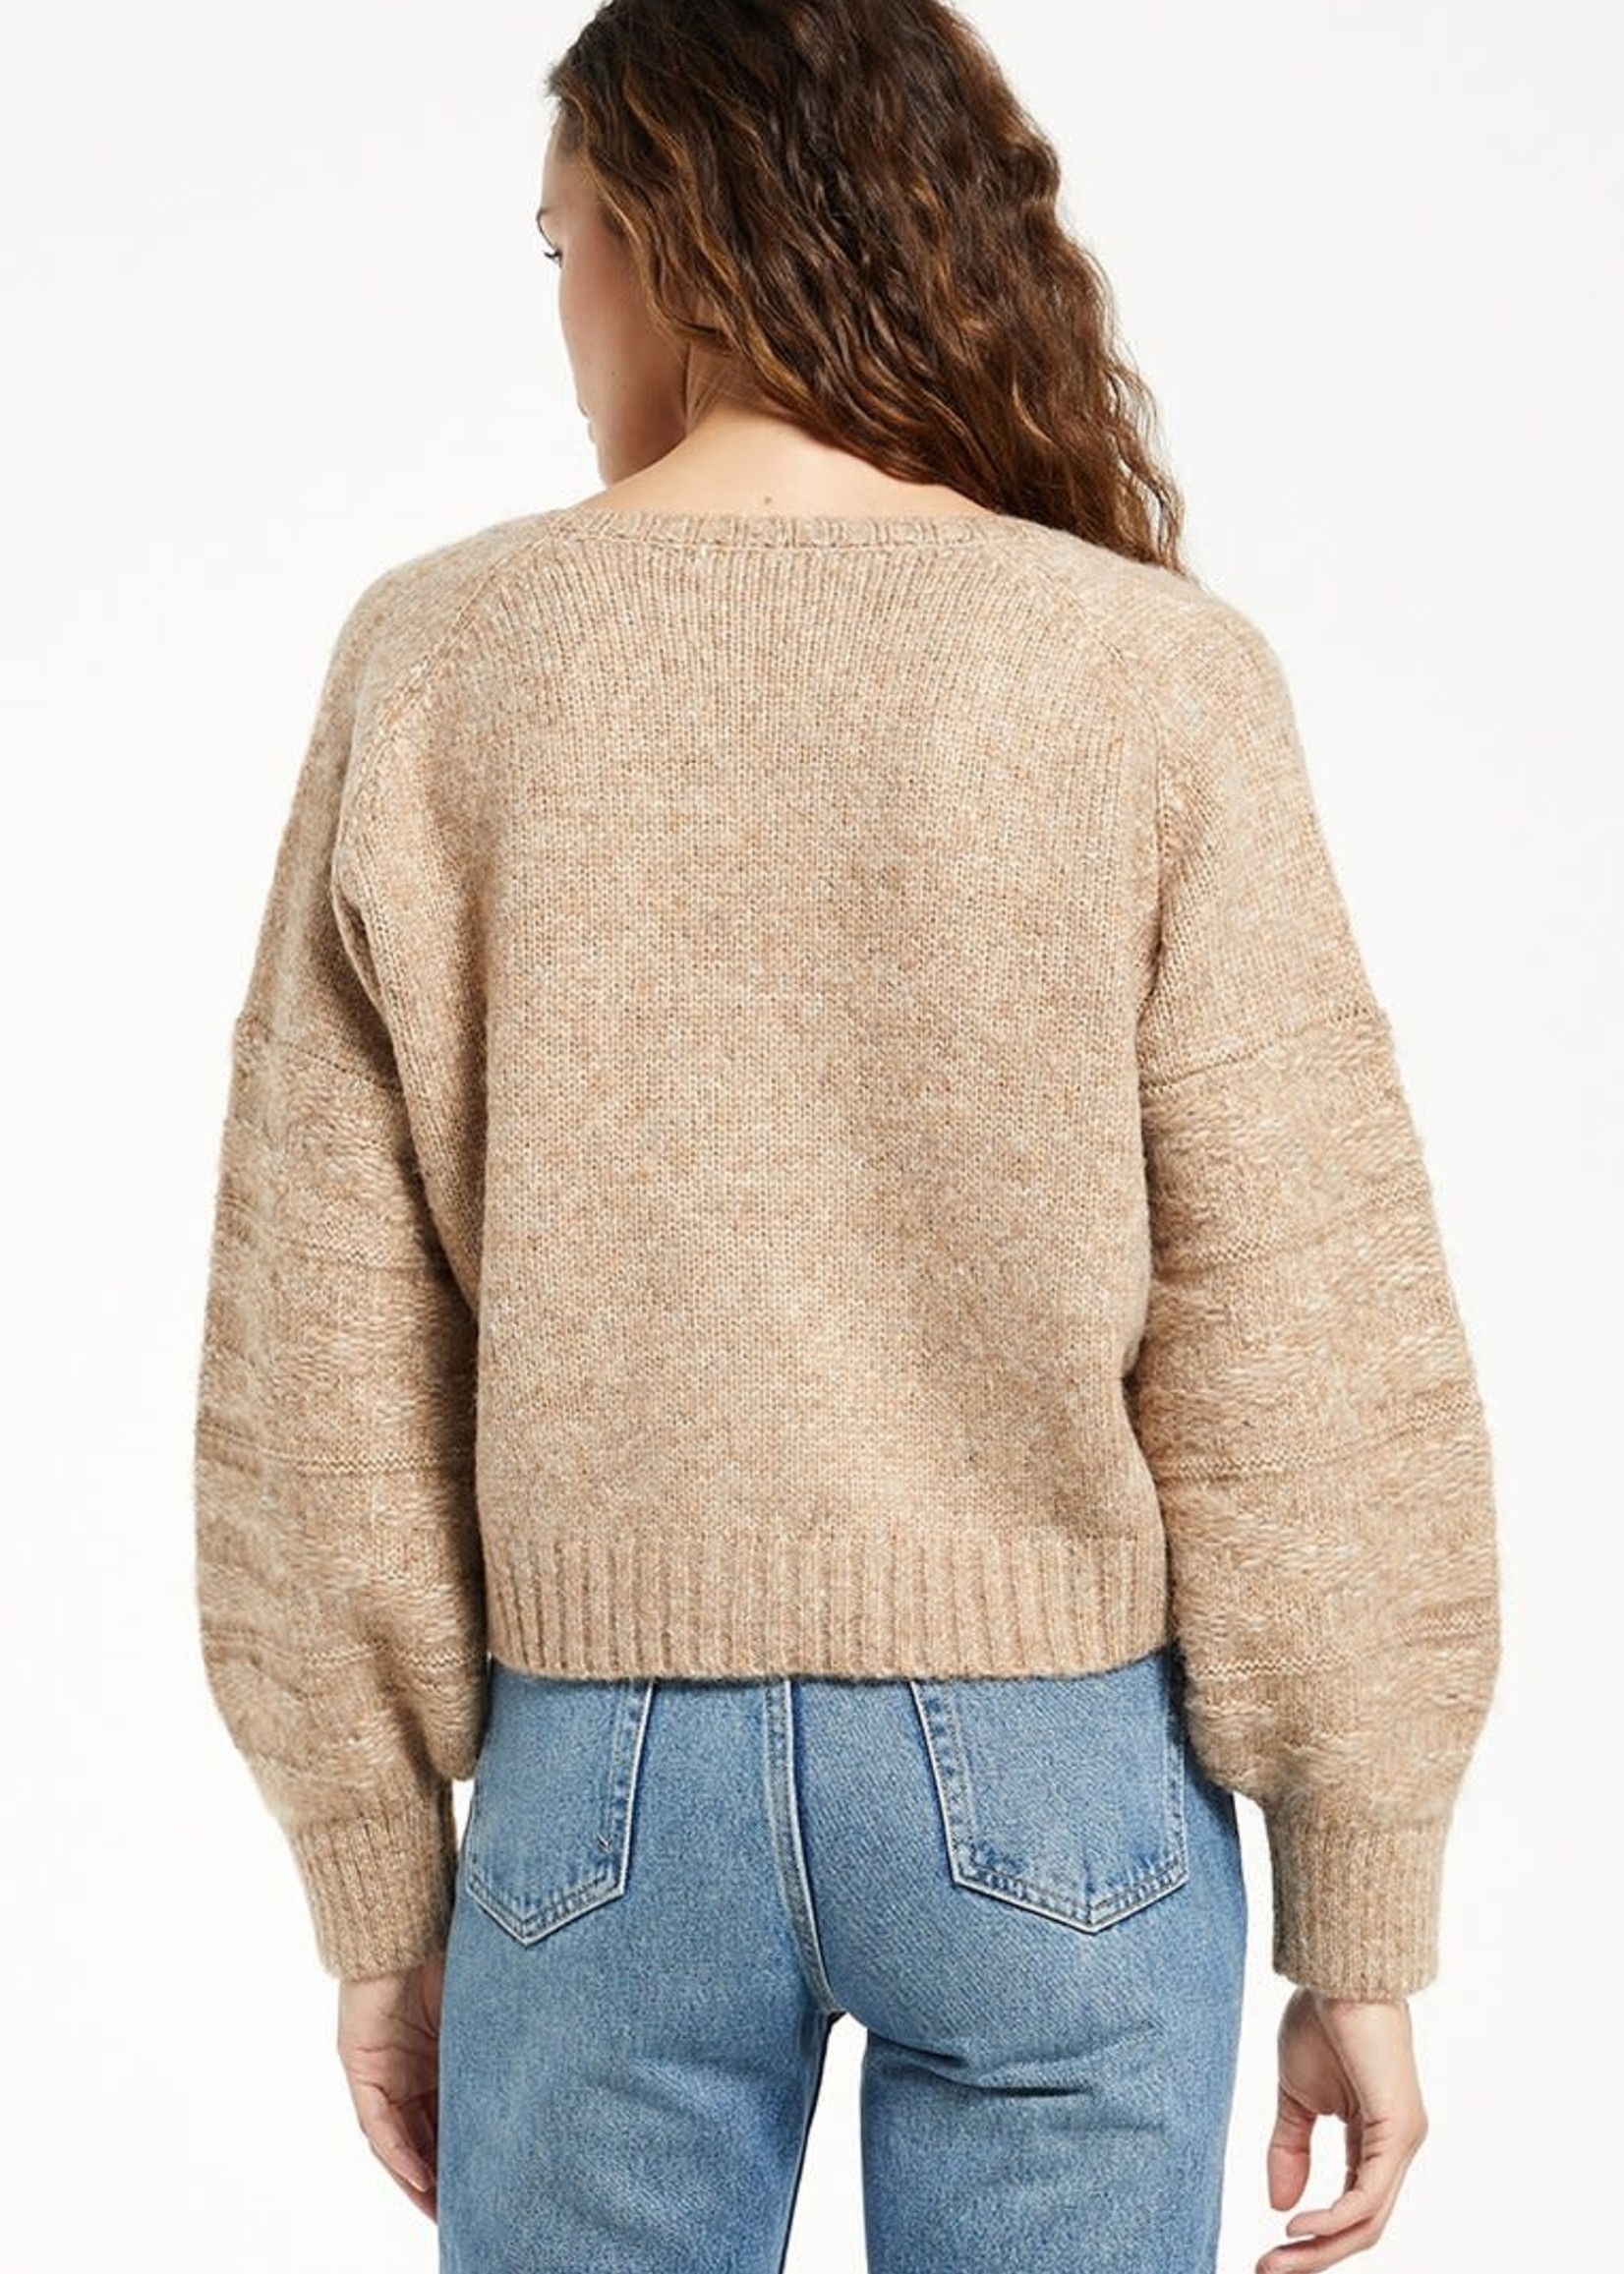 Z supply Essex cable sweater